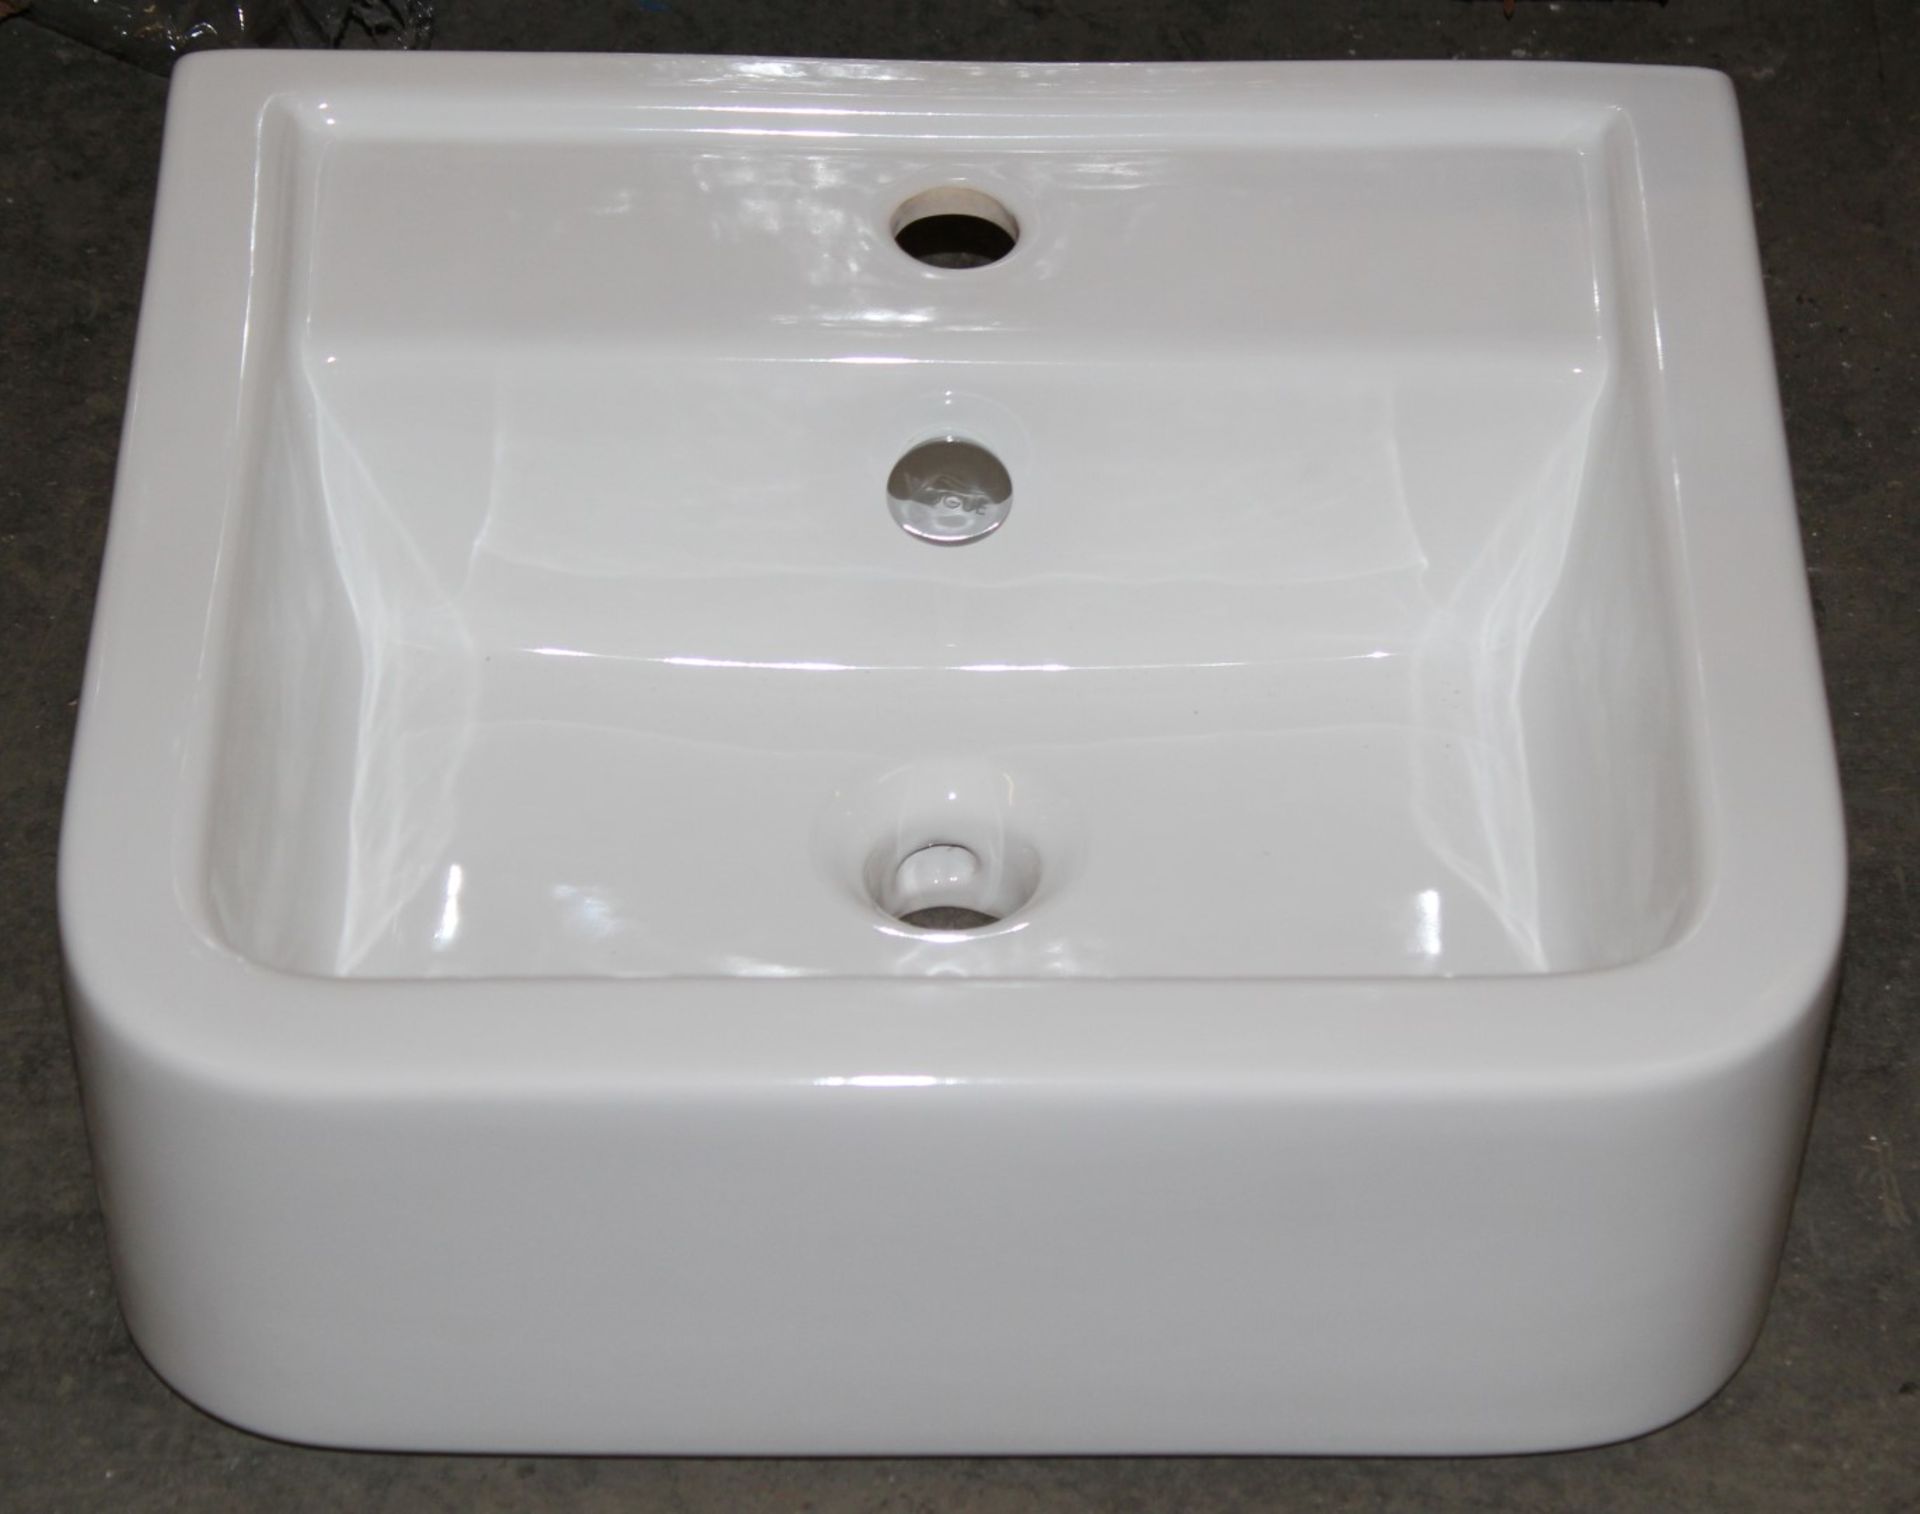 4 x Vogue Bathrooms OPTIONS Single Tap Hole SINK BASINS With Pedestals - 450mm Width - Brand New - Image 4 of 6